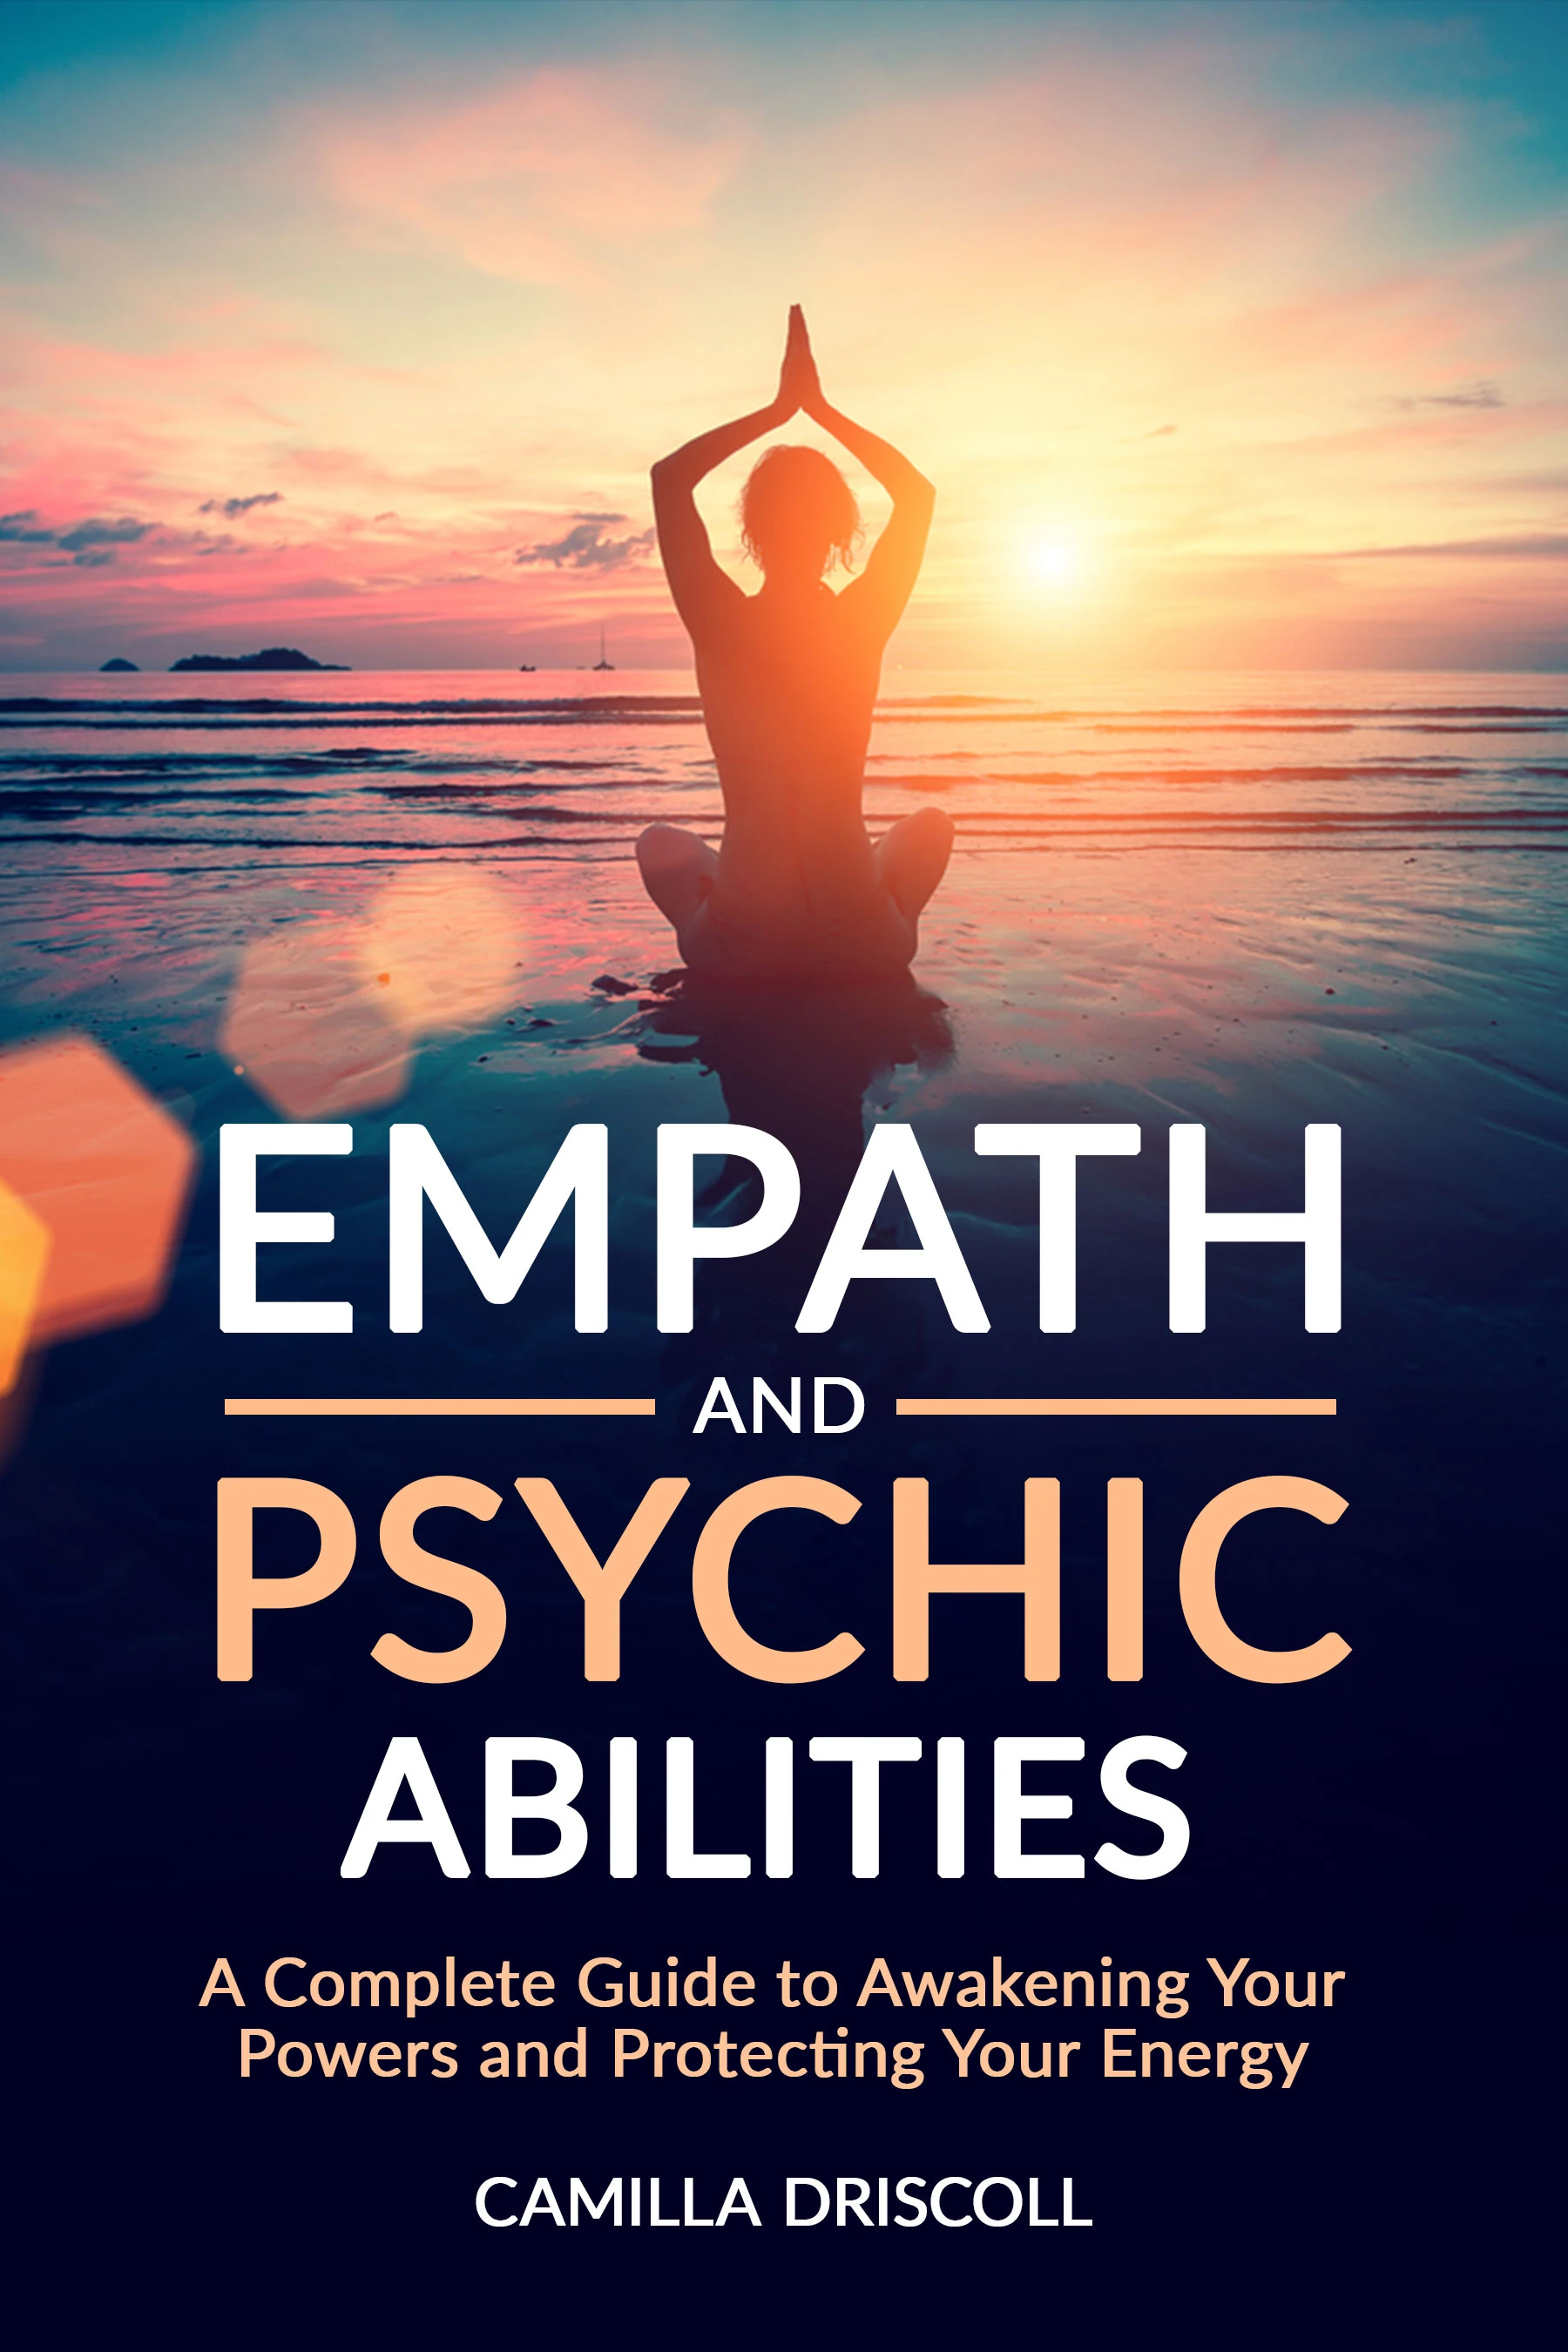 Empath and Psychic anilities